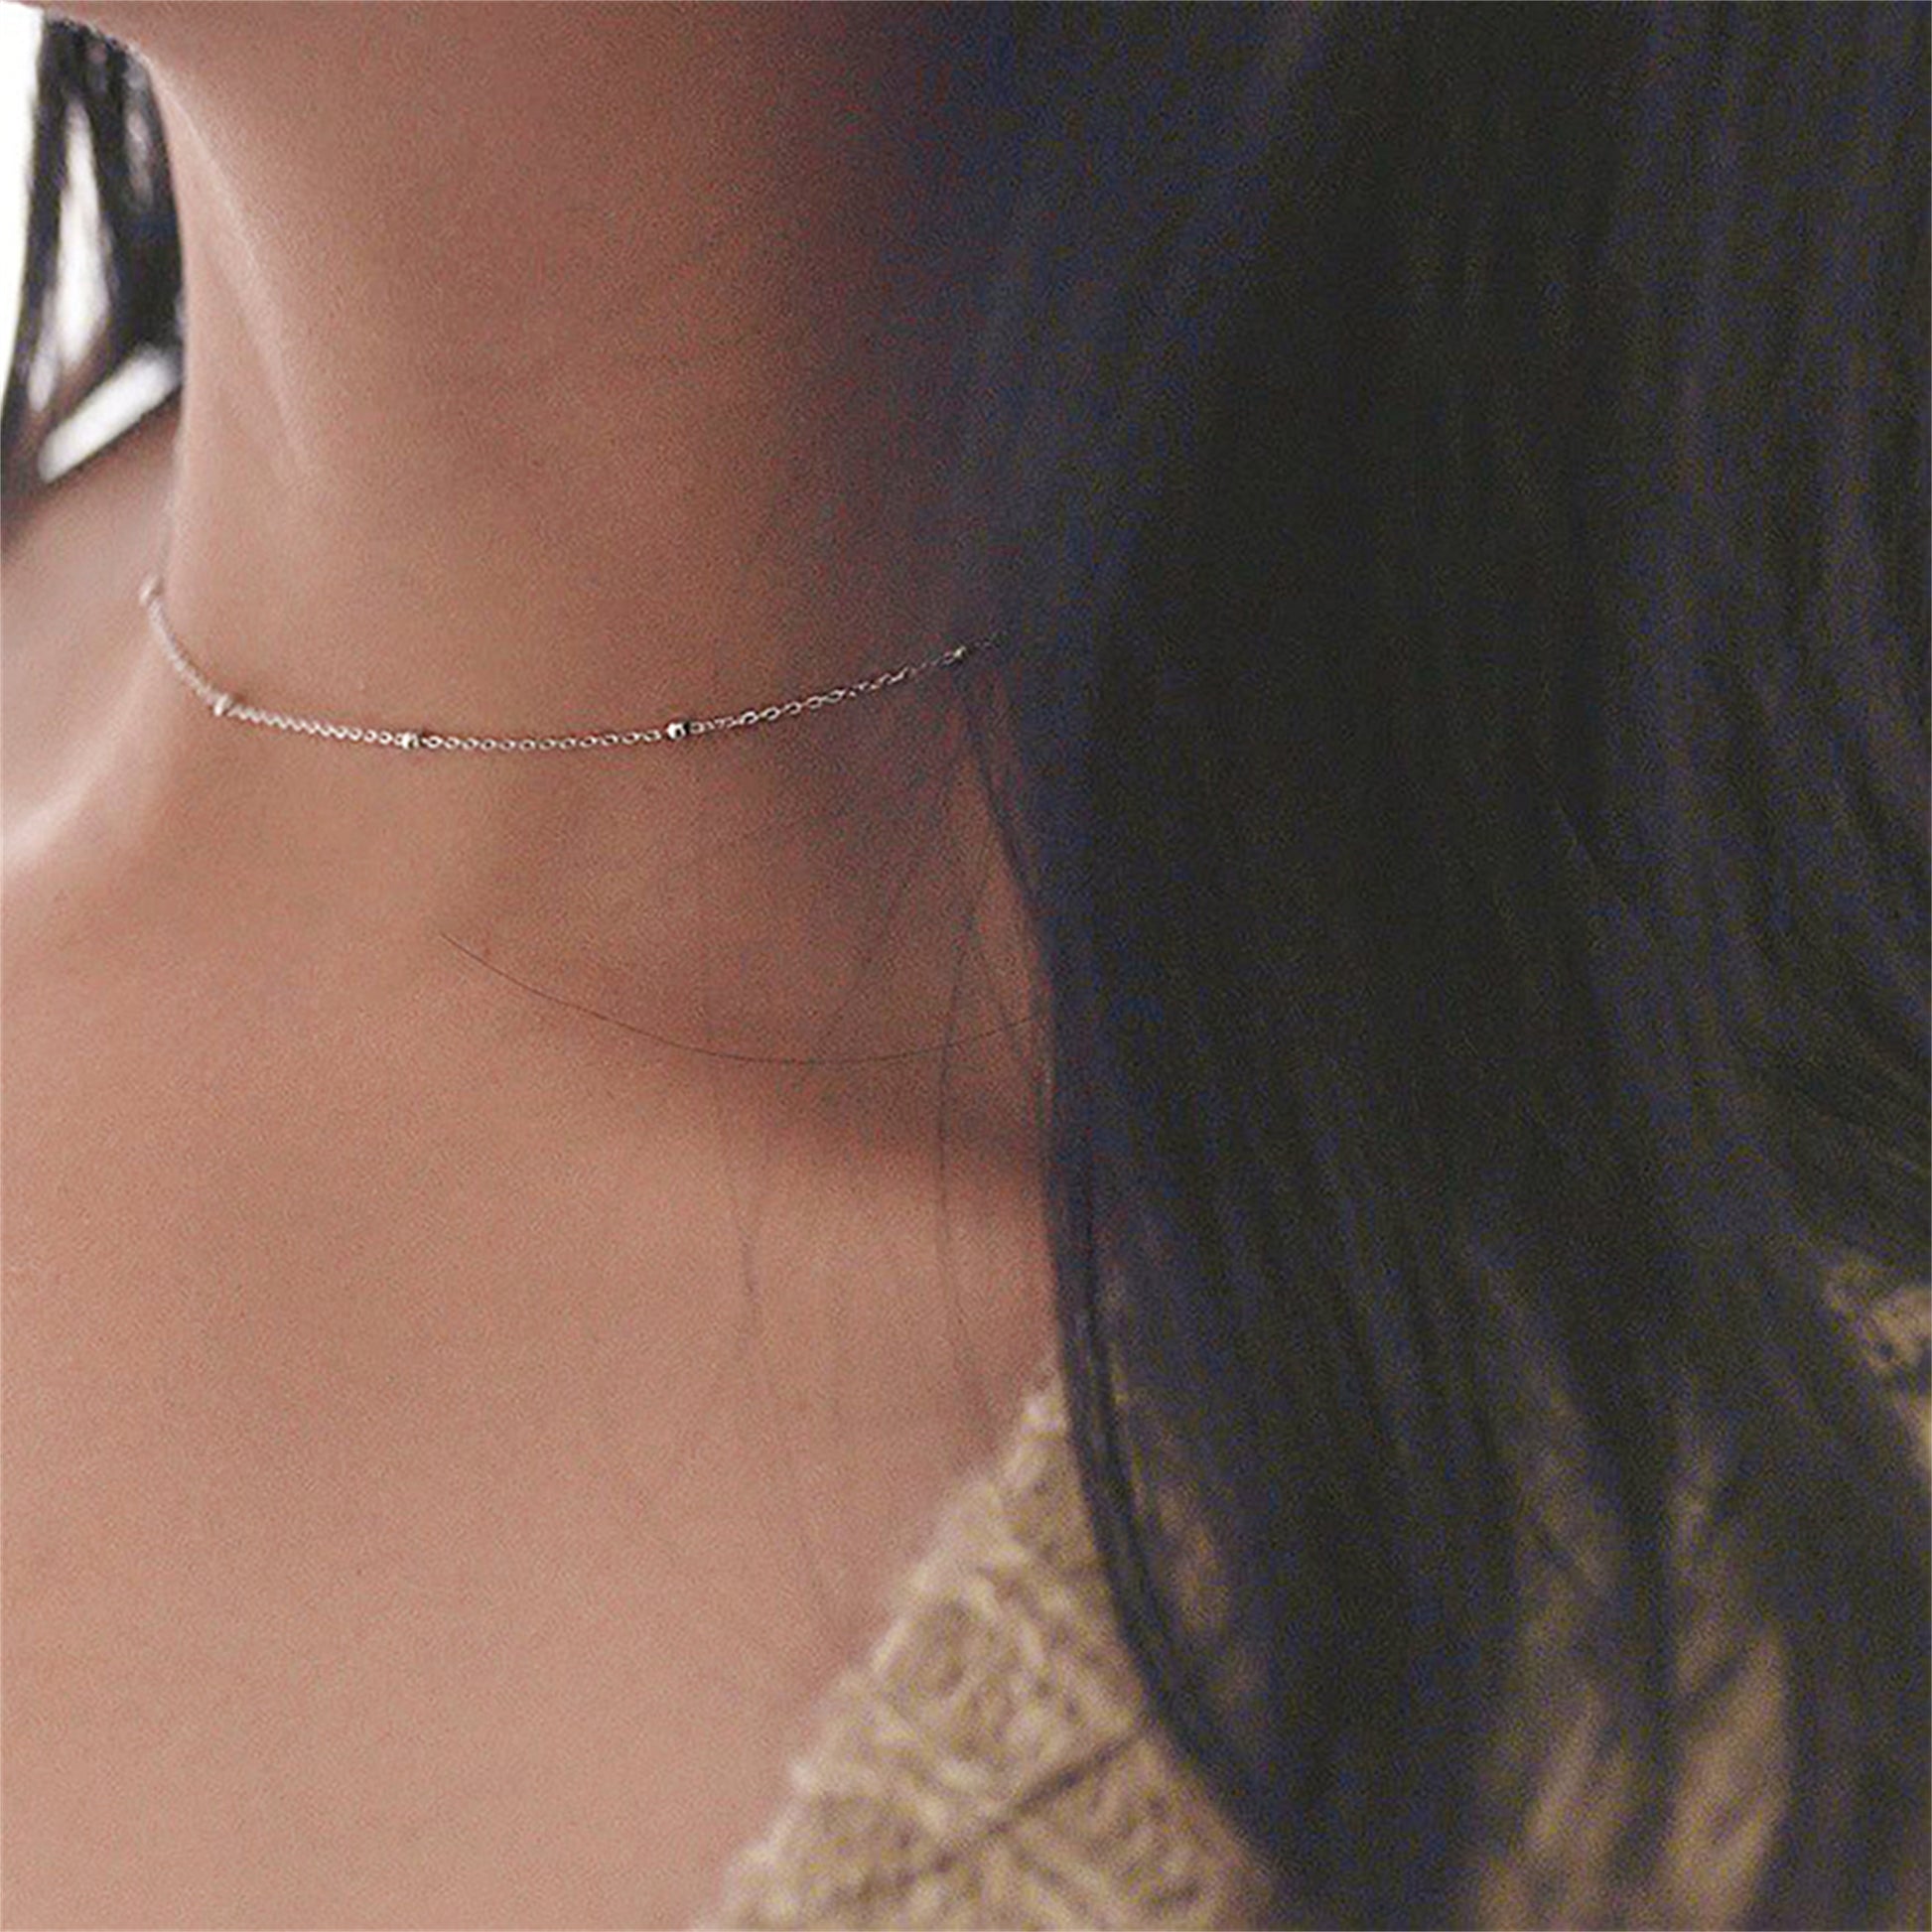 Sterling Silver Round Choker Necklace with 2mm Bobble Balls in 3 Tones - sugarkittenlondon